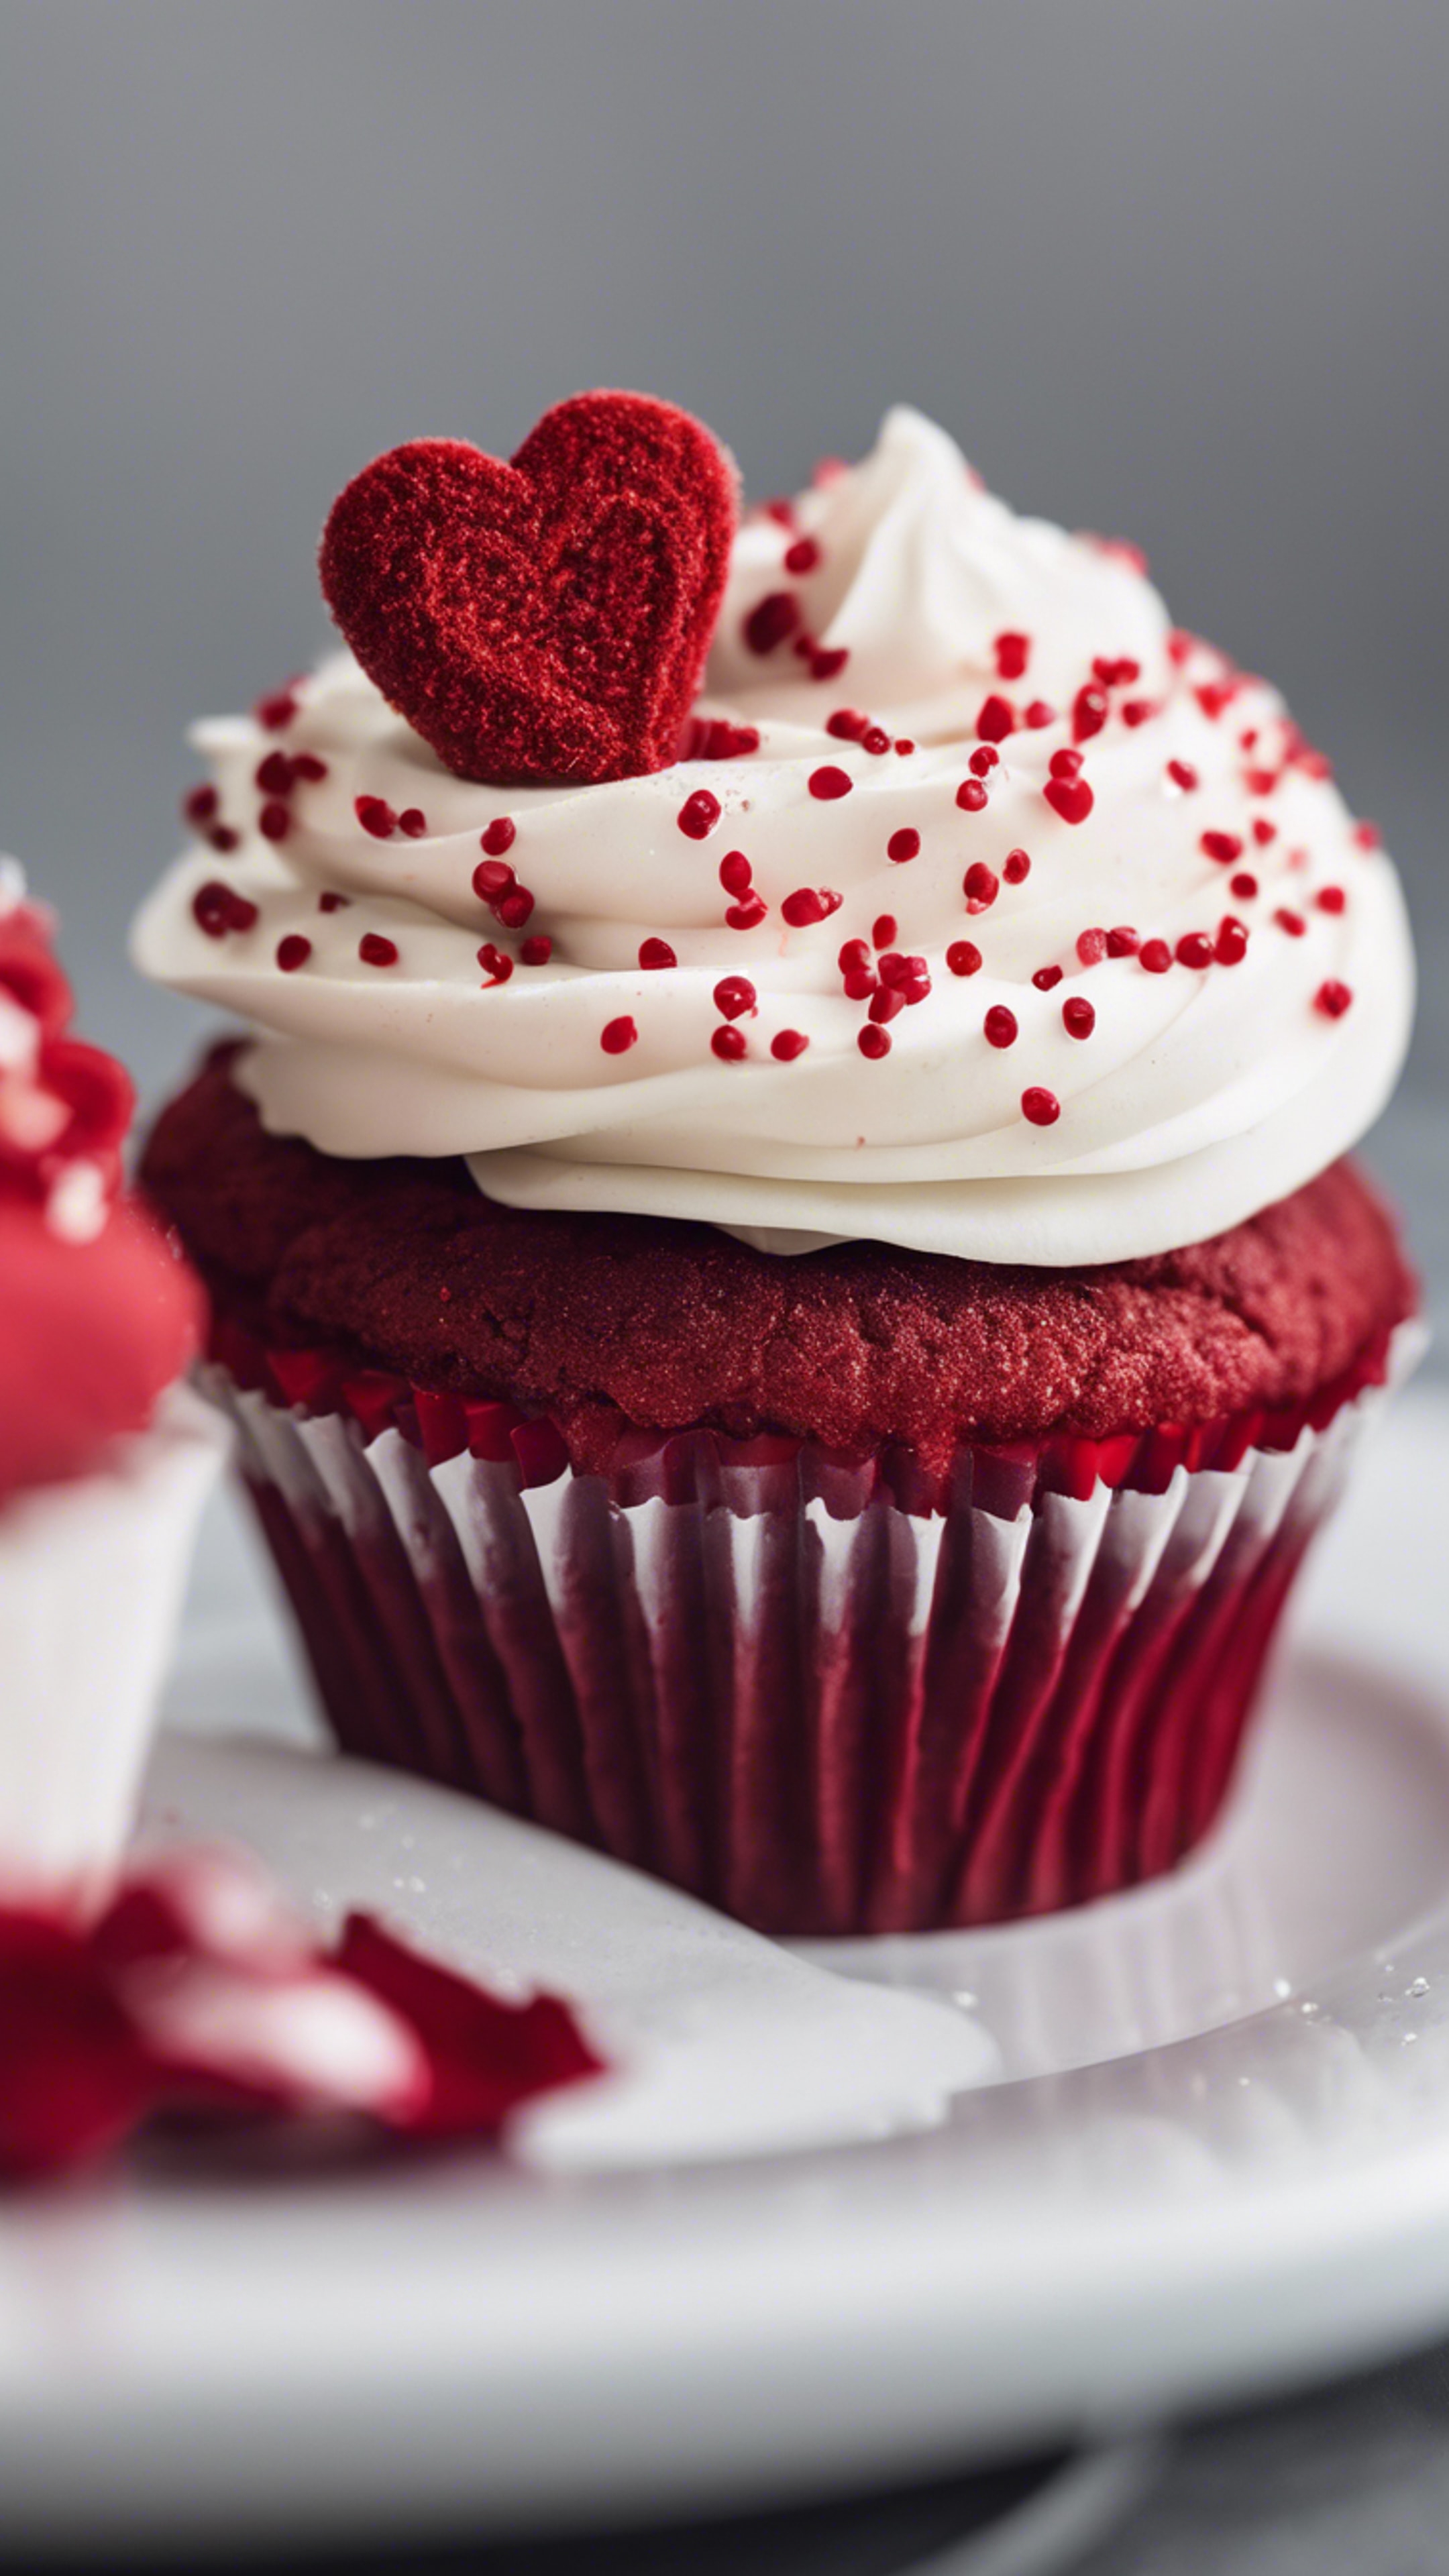 A red velvet cupcake with a heart-shaped sprinkle on top, presented on a white ceramic plate. کاغذ دیواری[2d98083c137b4c3e8f81]